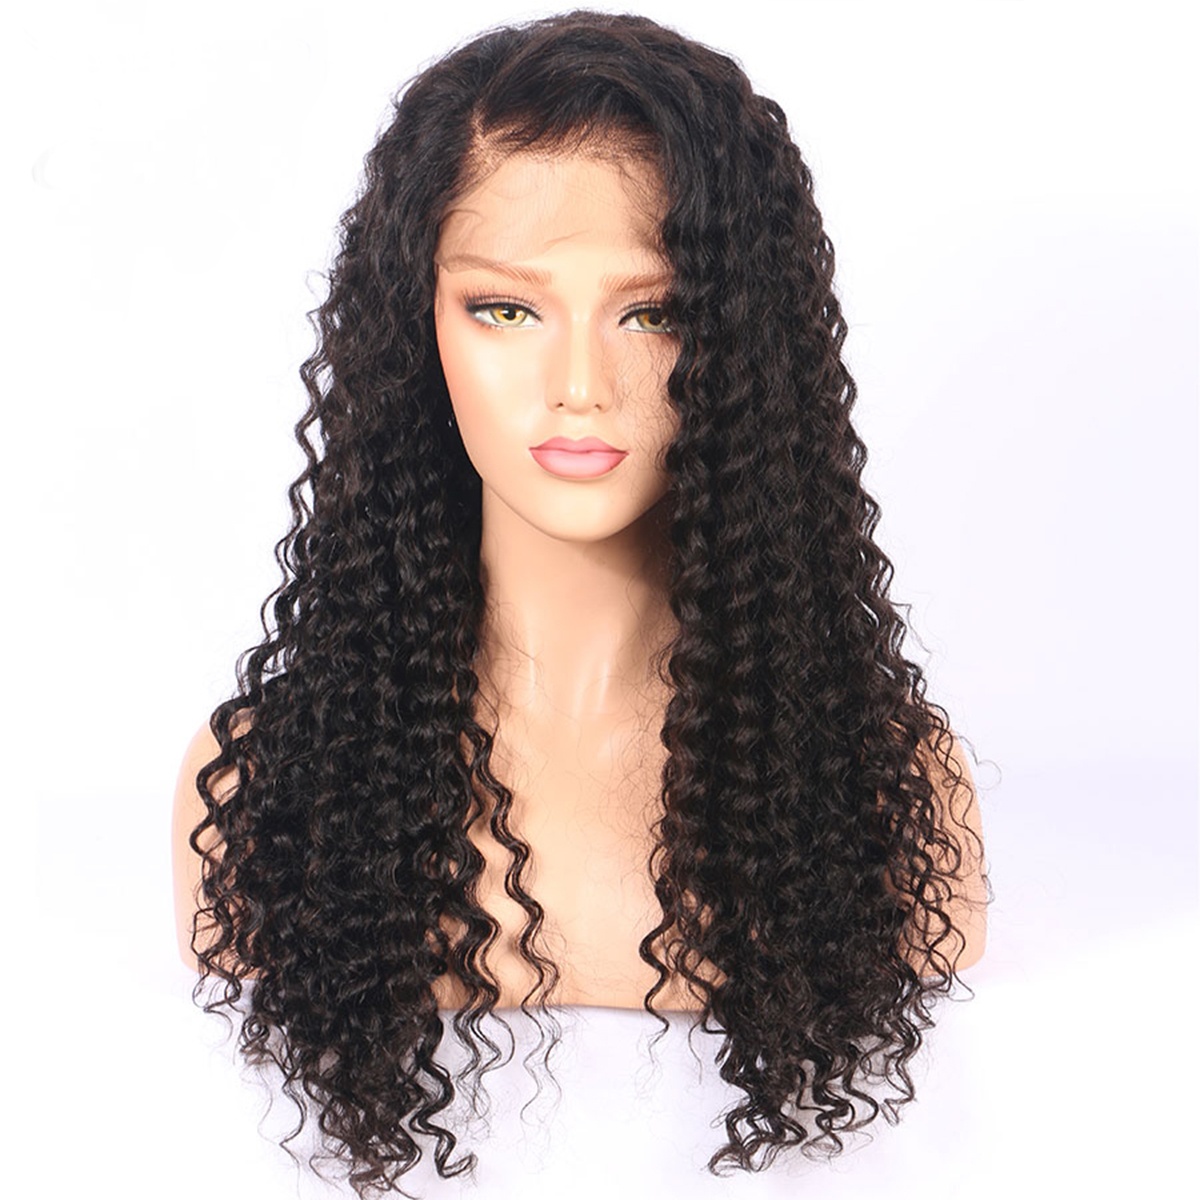 ISABEL Mongolian Kinky Curly Full Lace Human Hair Wigs For African Women Glueless Curly Human Hair Wigs